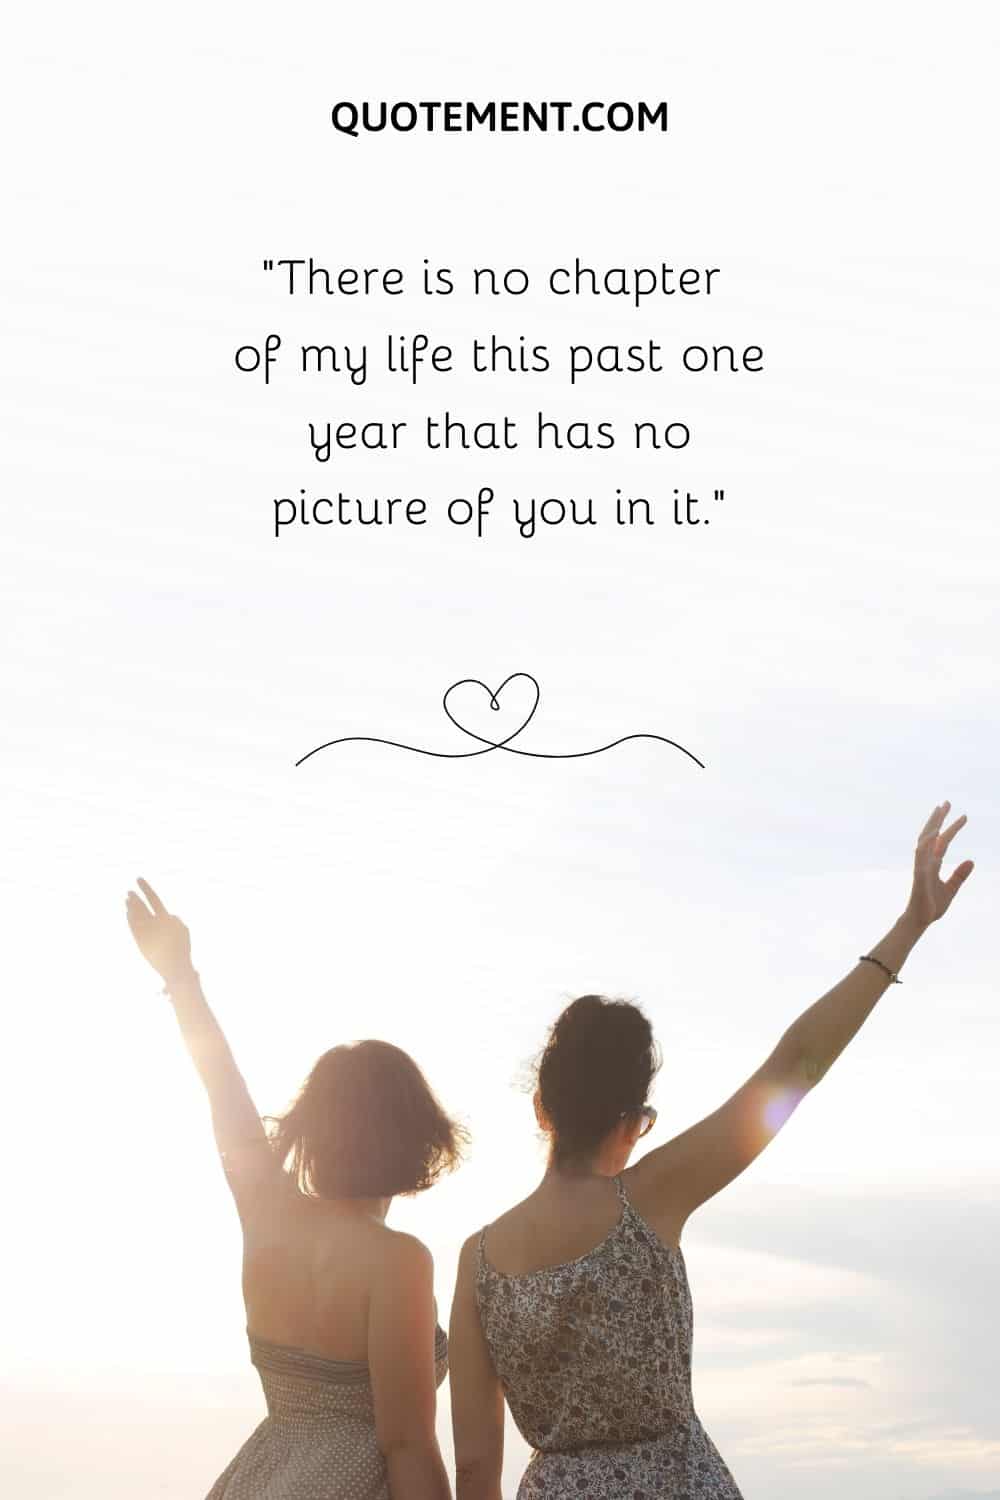 There is no chapter of my life this past one year that has no picture of you in it.”